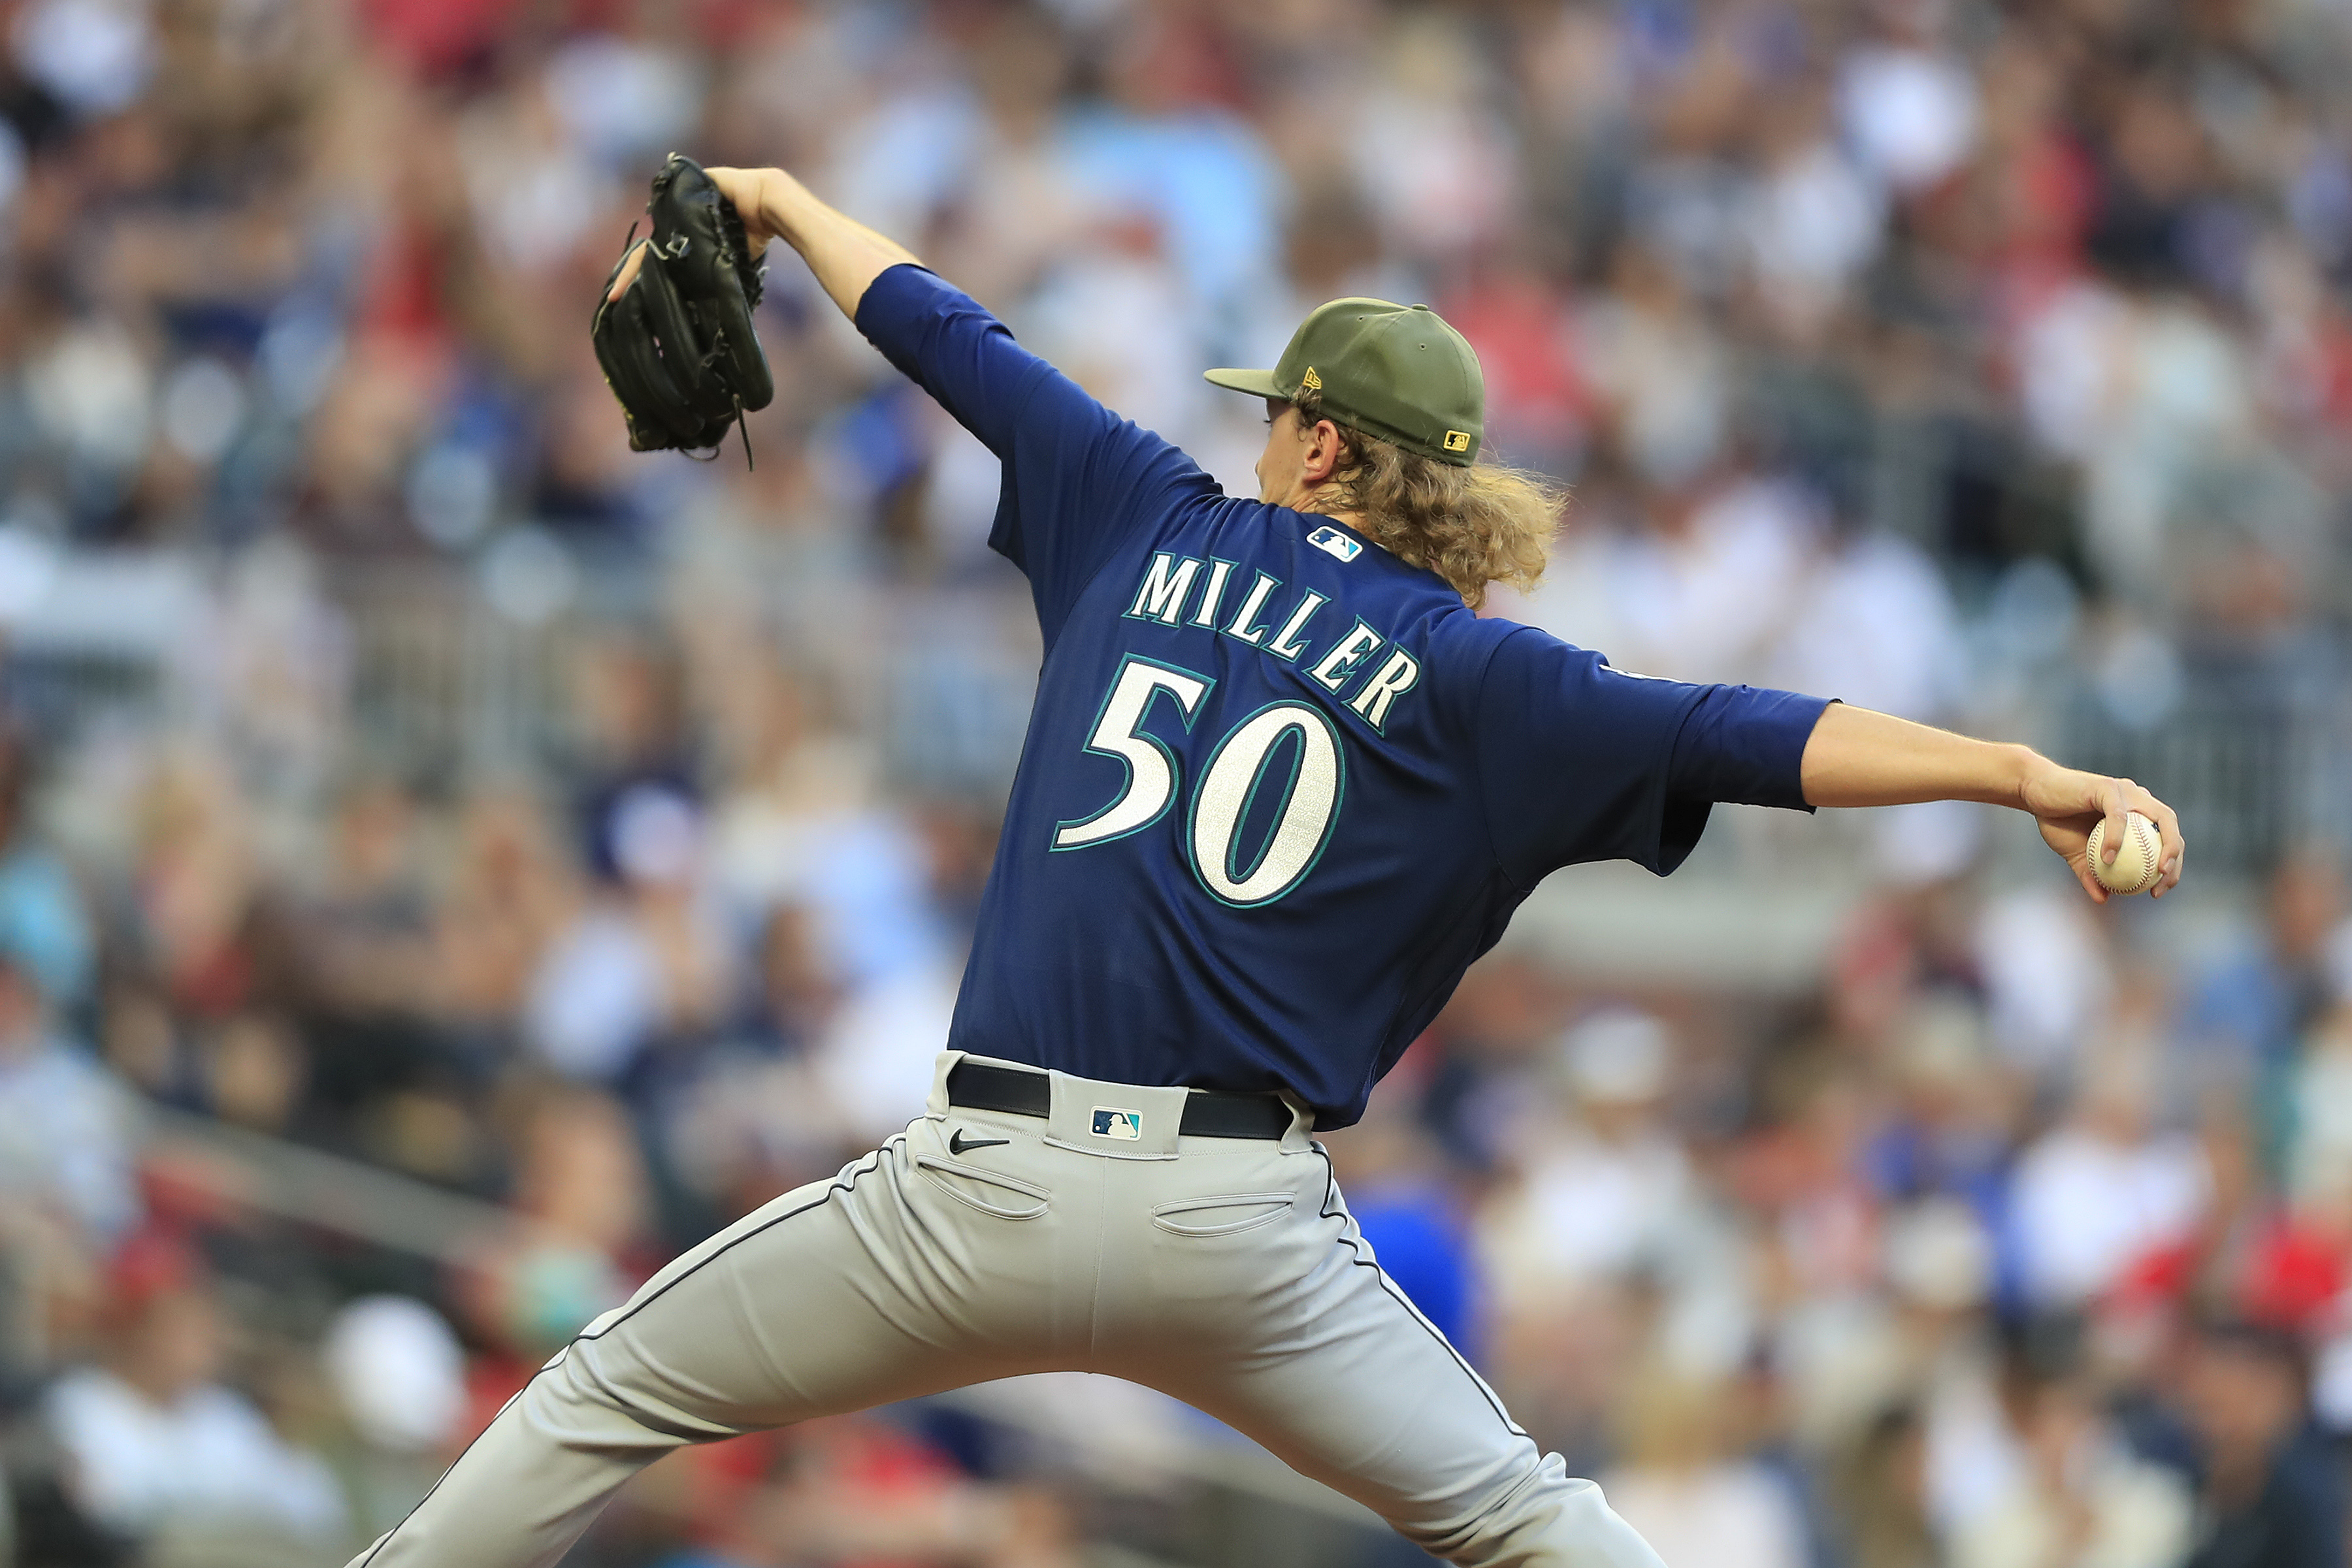 Seattle Mariners starting pitcher Bryce Miller delivers a pitch during the Friday evening MLB interleague game between the Seattle Mariners and the Atlanta Braves on May 19, 2023 at Truist Park in Atlanta, Georgia.